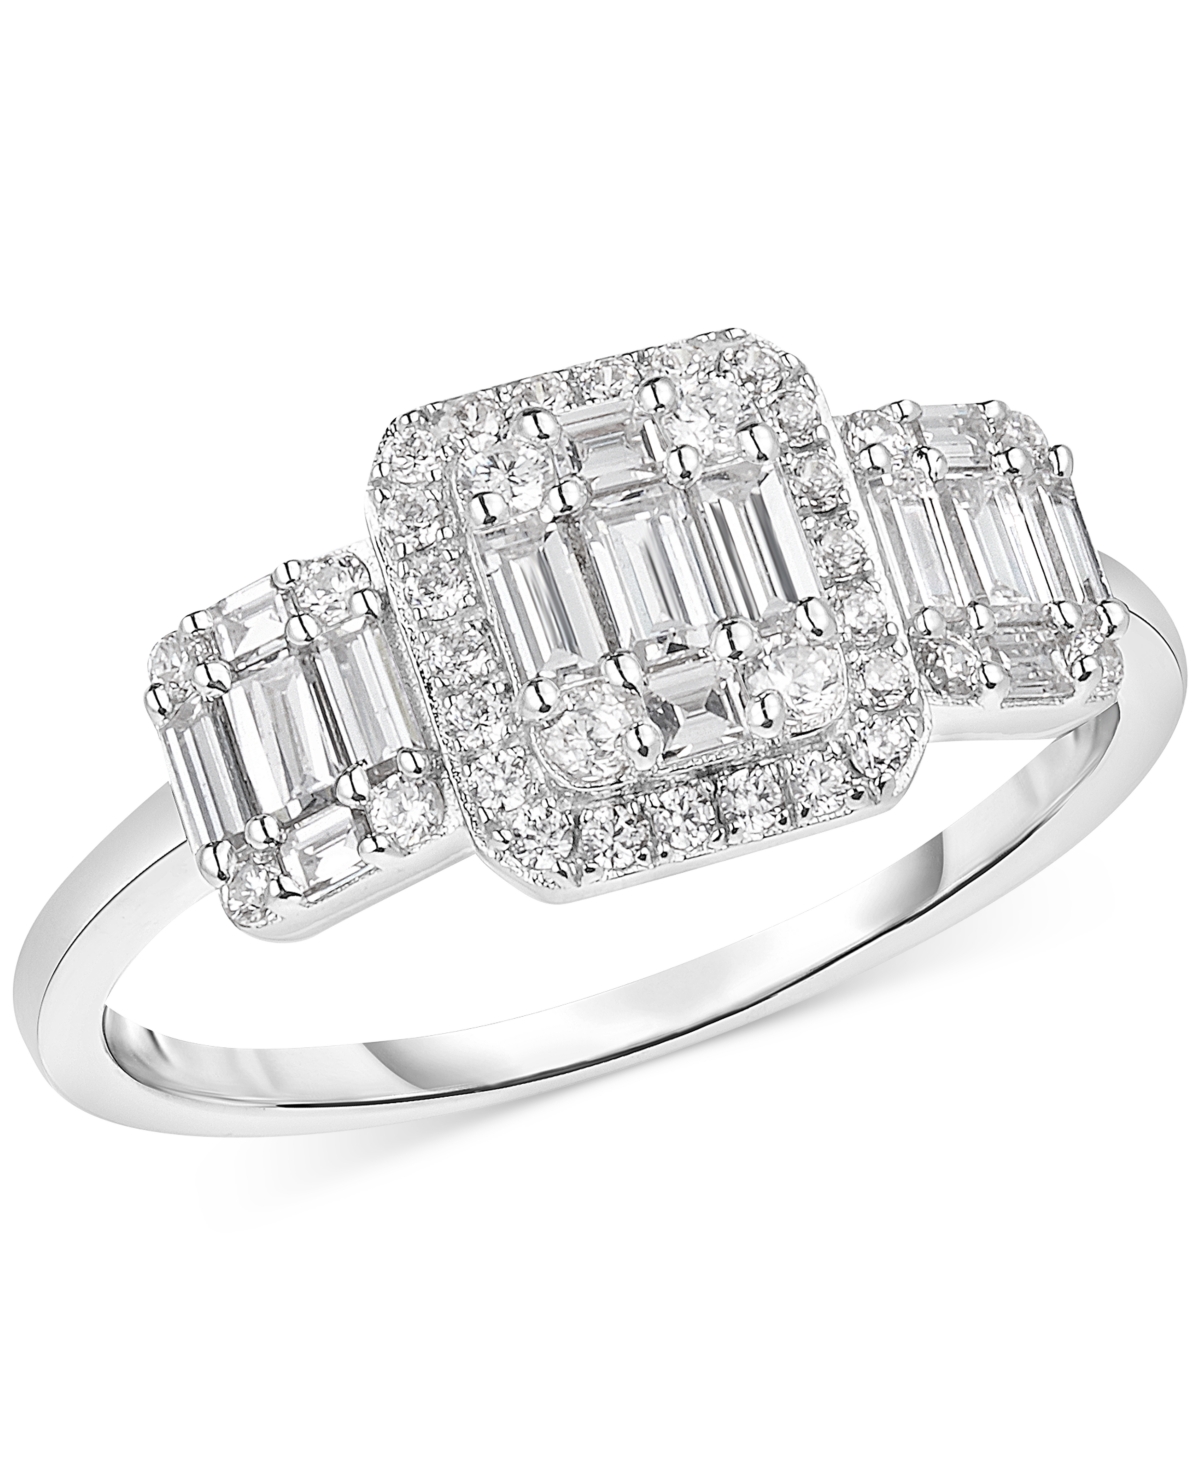 Cubic Zirconia Baguette Cluster Ring in Sterling Silver - Sterling Silver